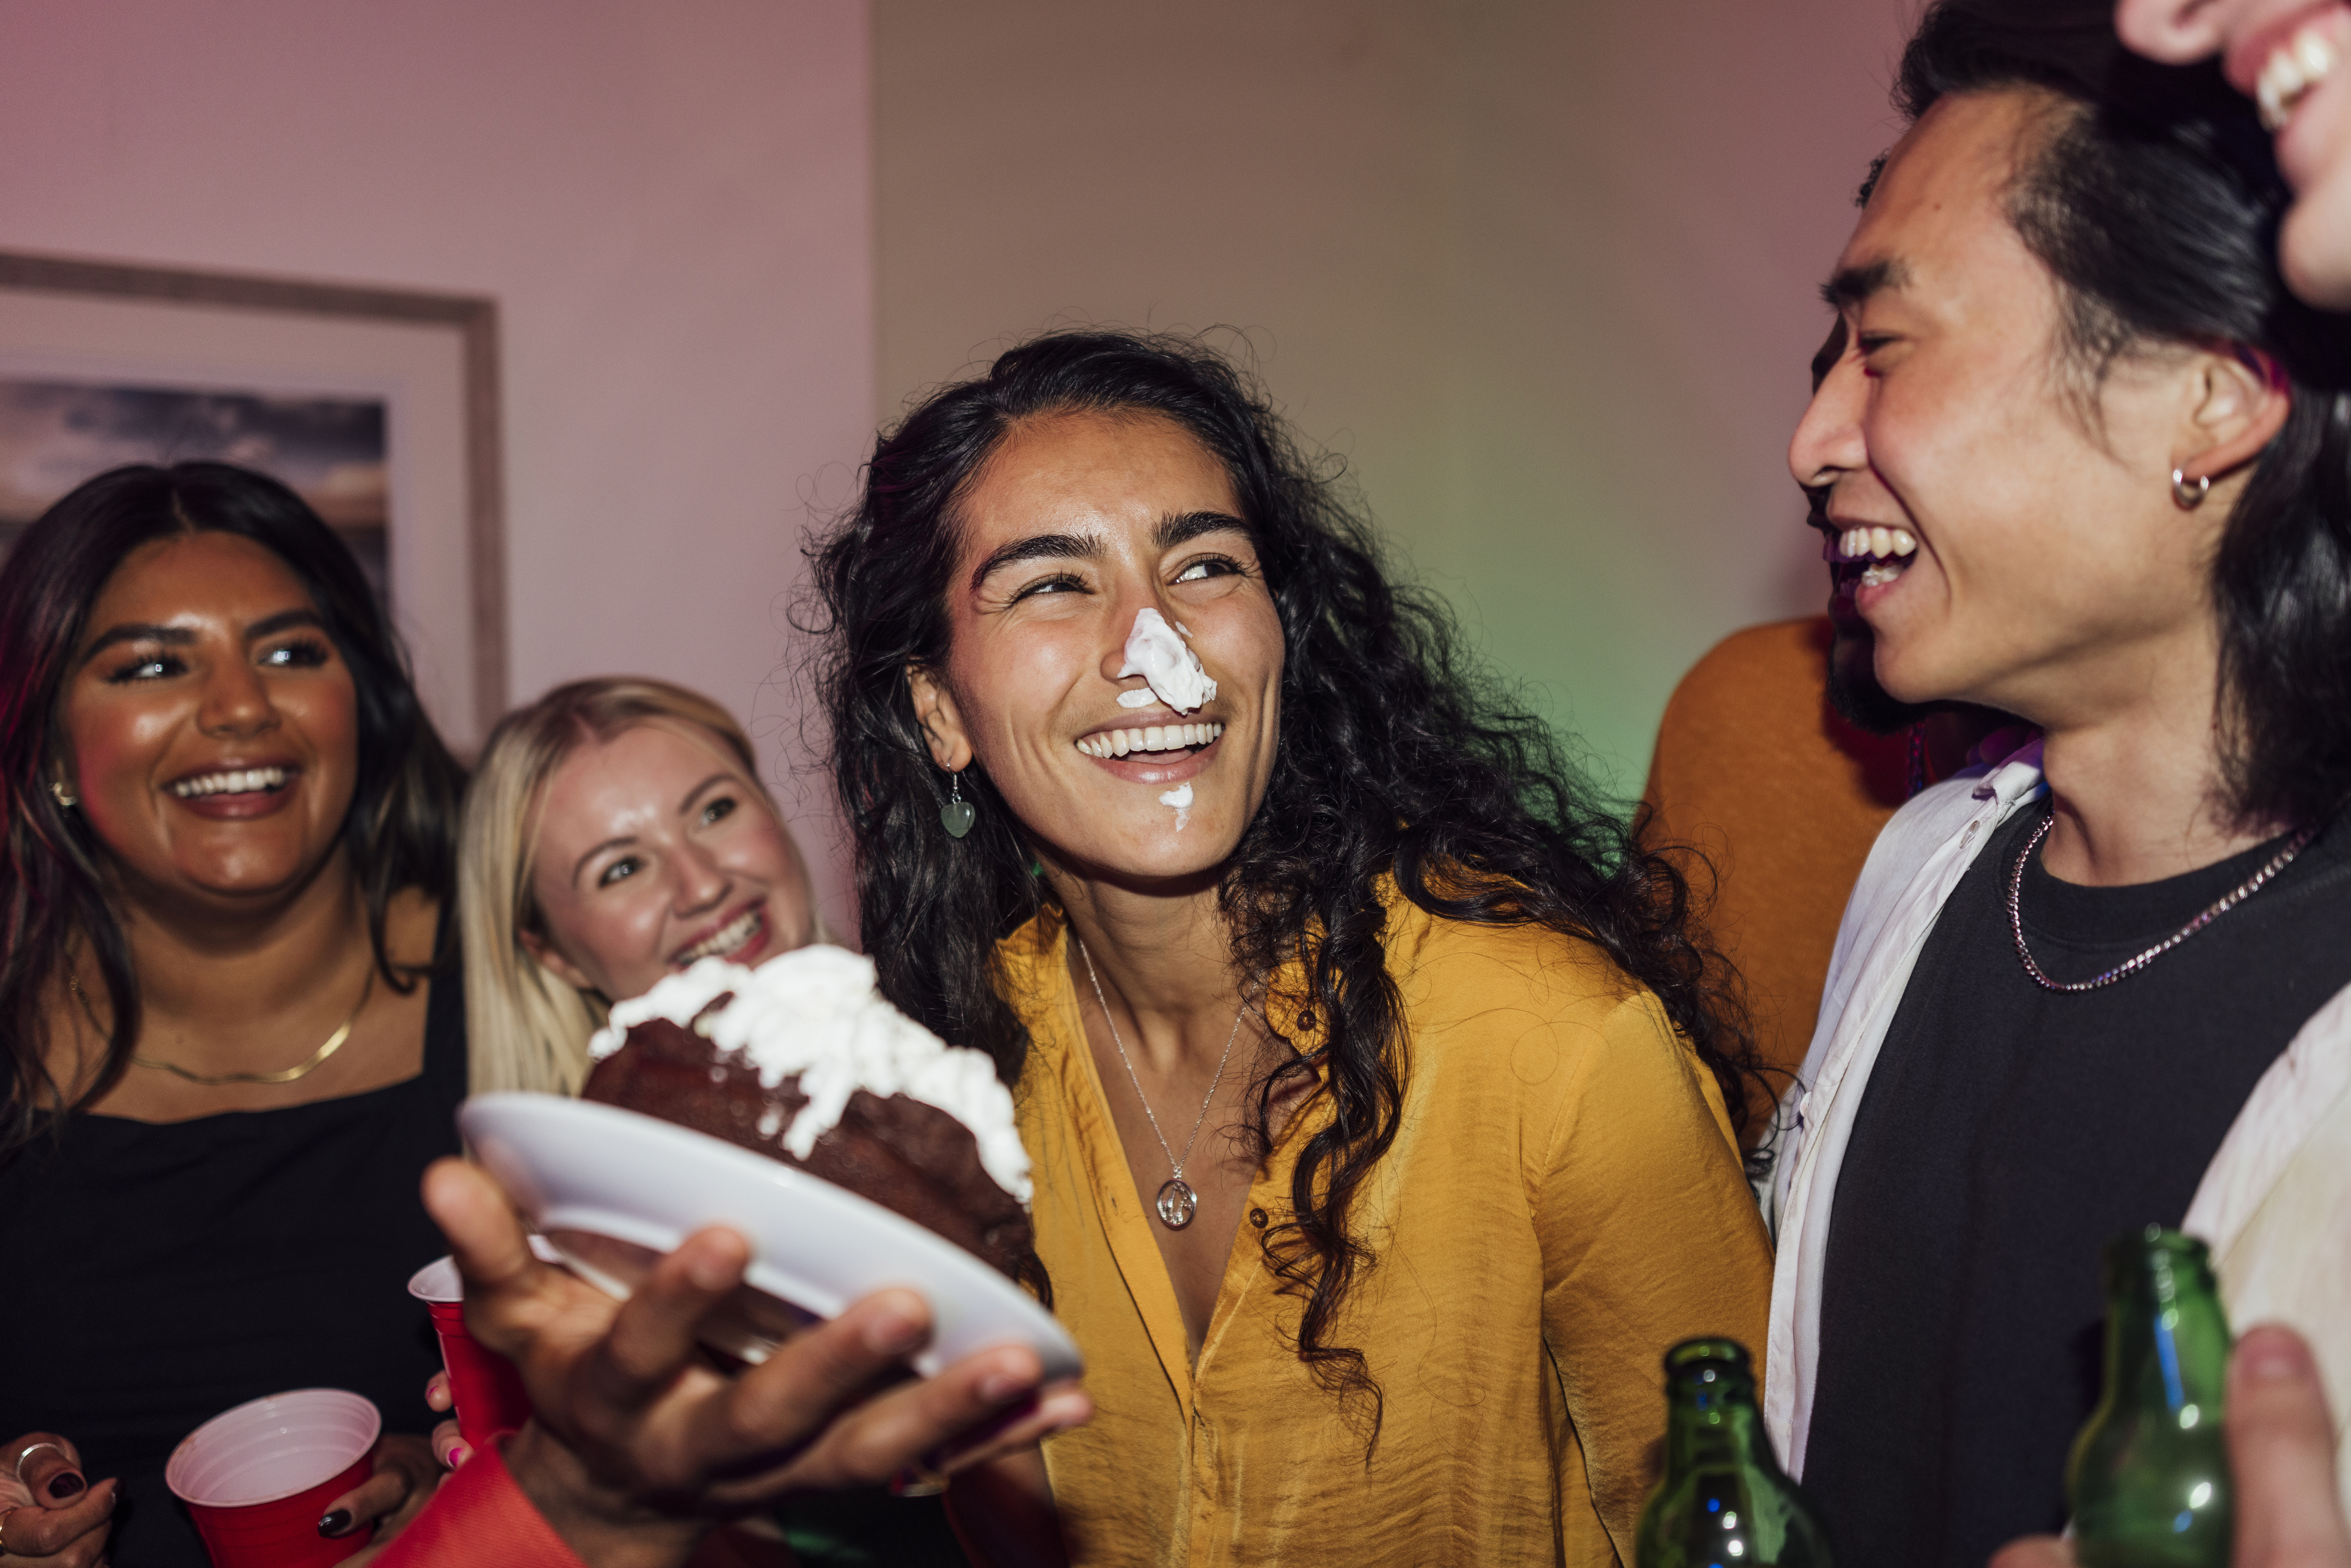 Group of friends at a party, one with pie on their face, smiling and holding a pie slice while others laugh. Names not given